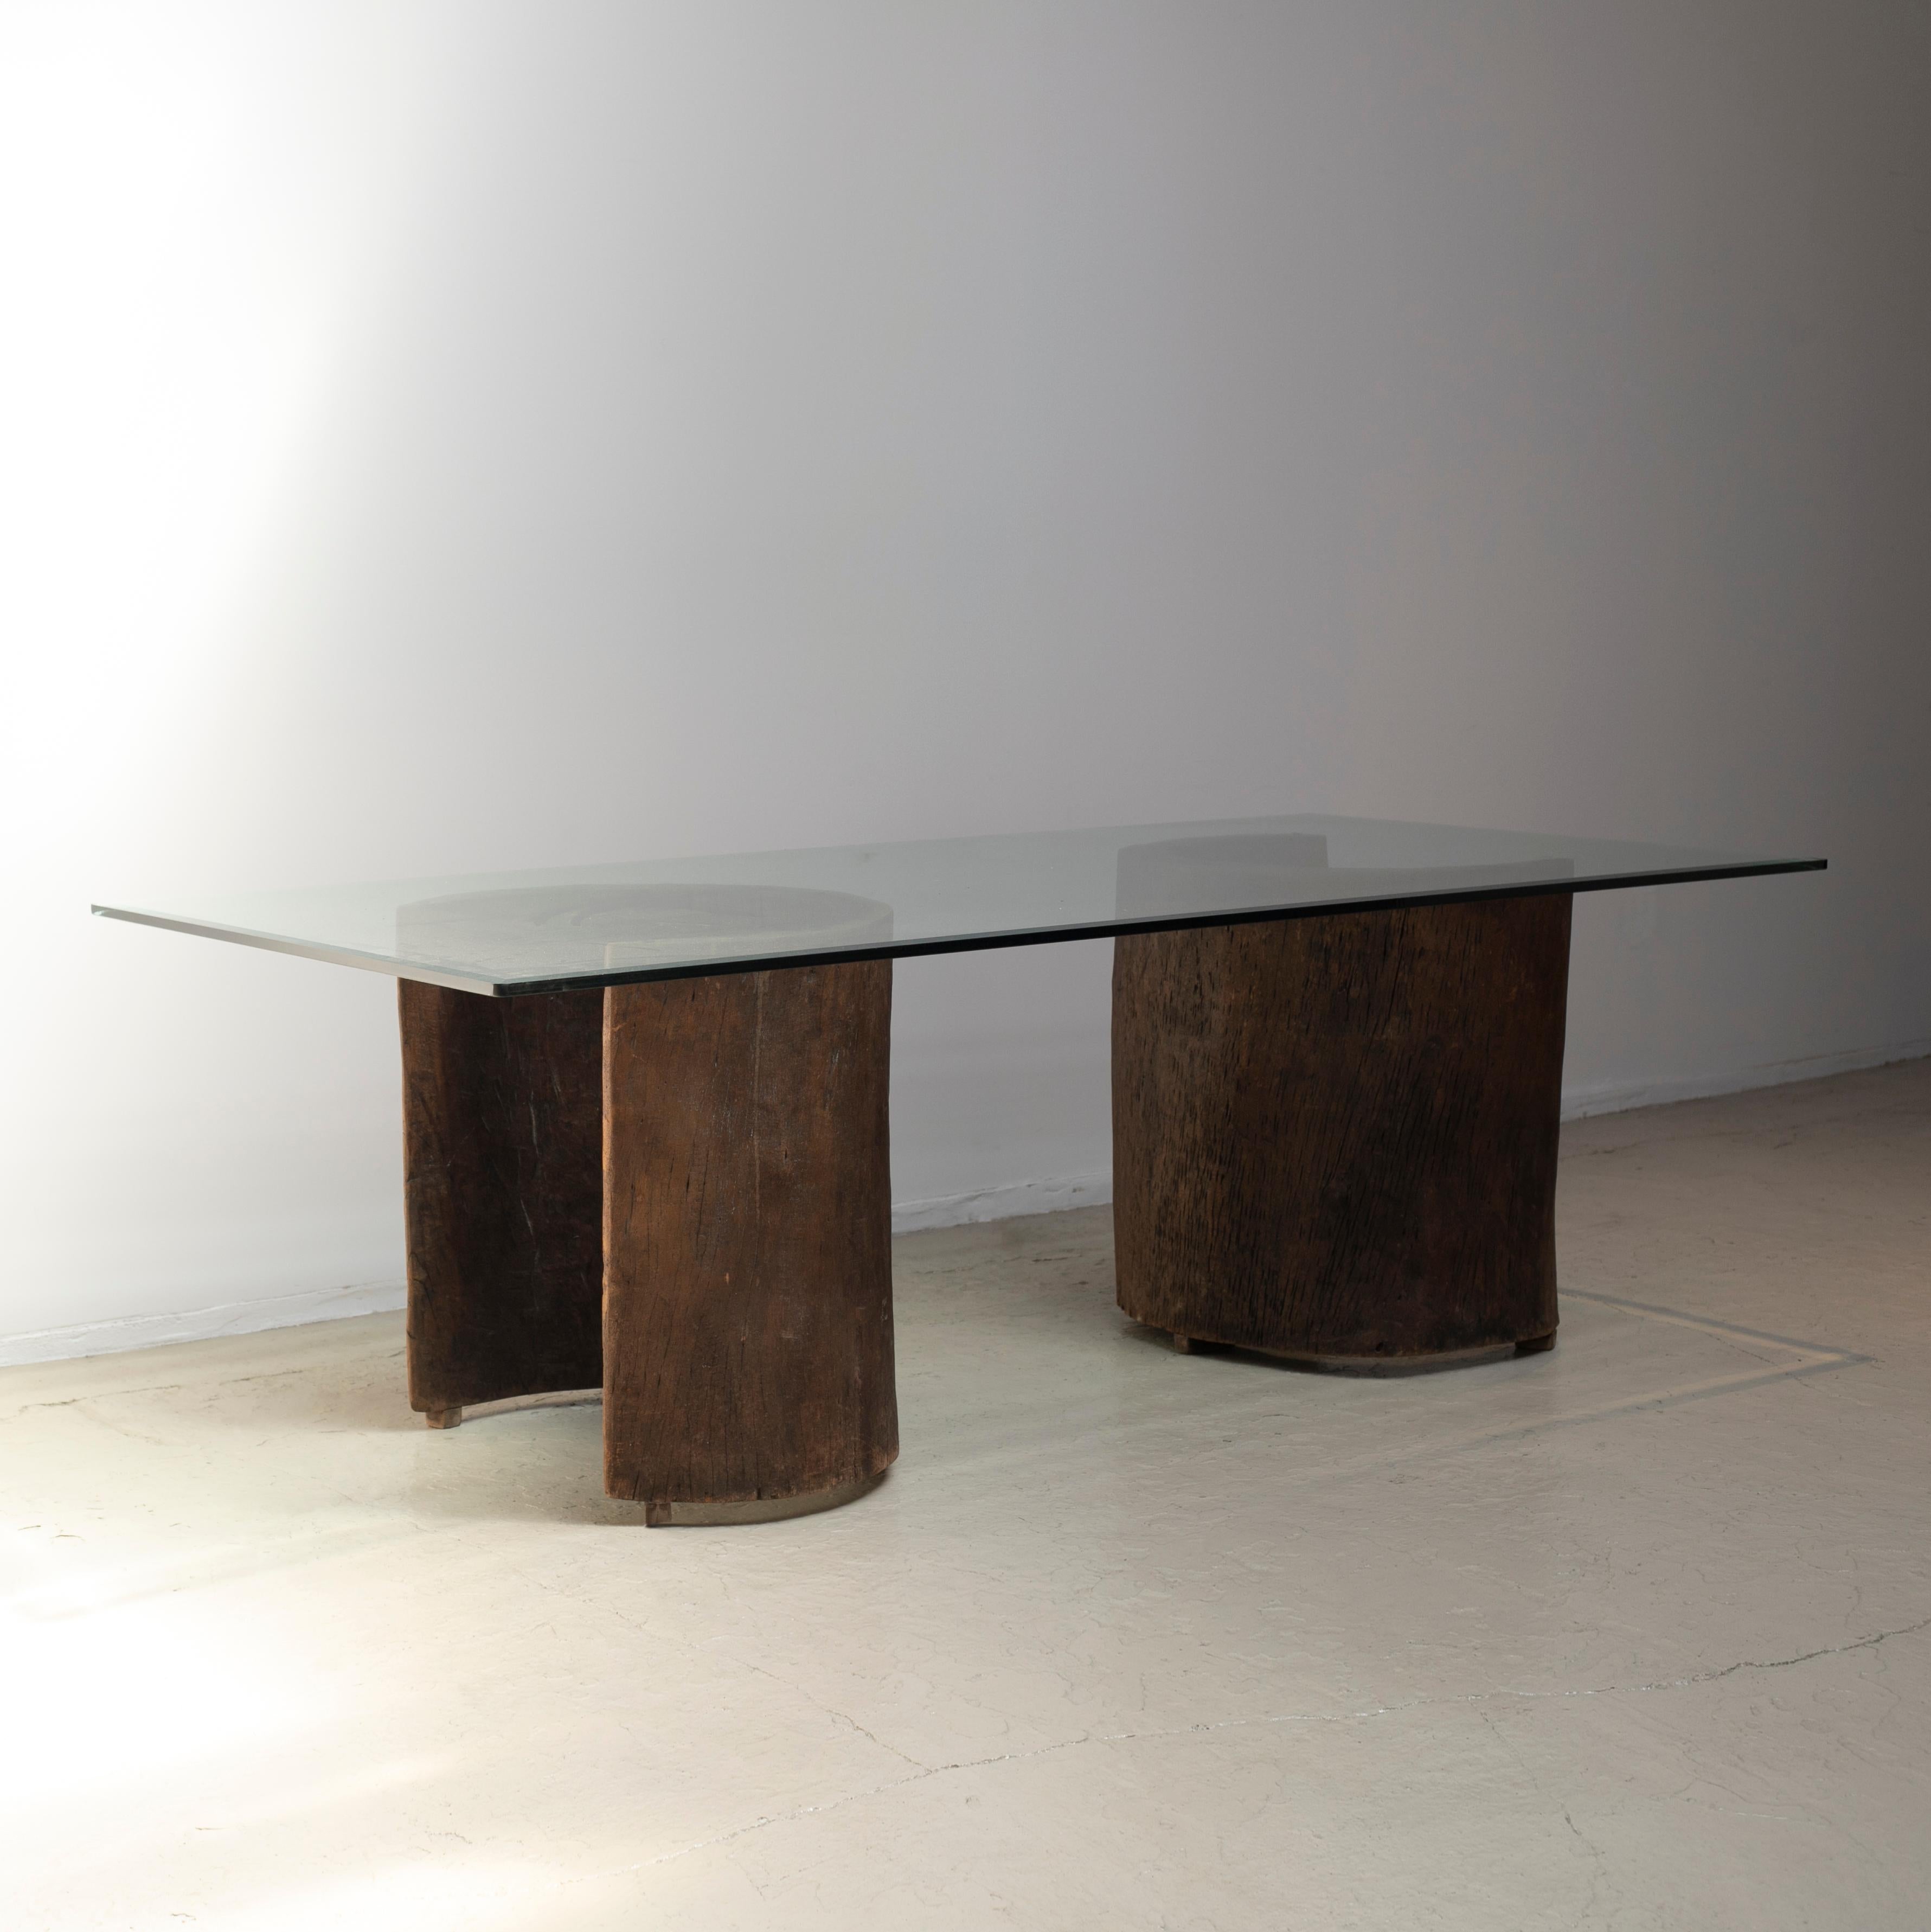 Dining table designed by José Zanine Caldas in 1970s.
The original glass top and Brazilian solid hard wood legs.
This individual was exhibited at the exhibition 